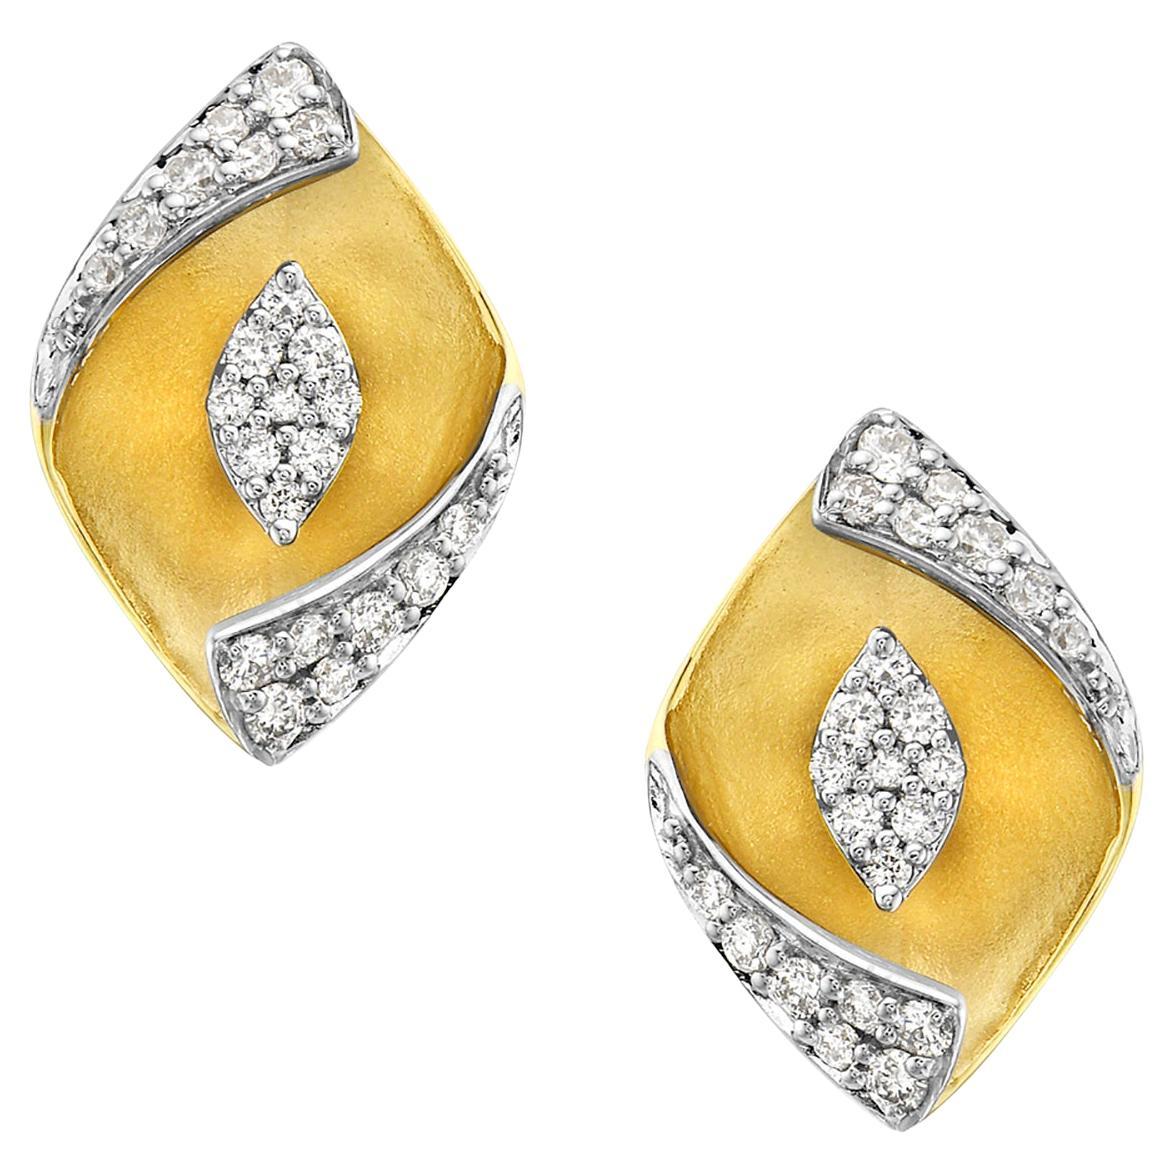 Folded Paper Shaped Stud Earrings with Diamonds Made in 14k Yellow Gold